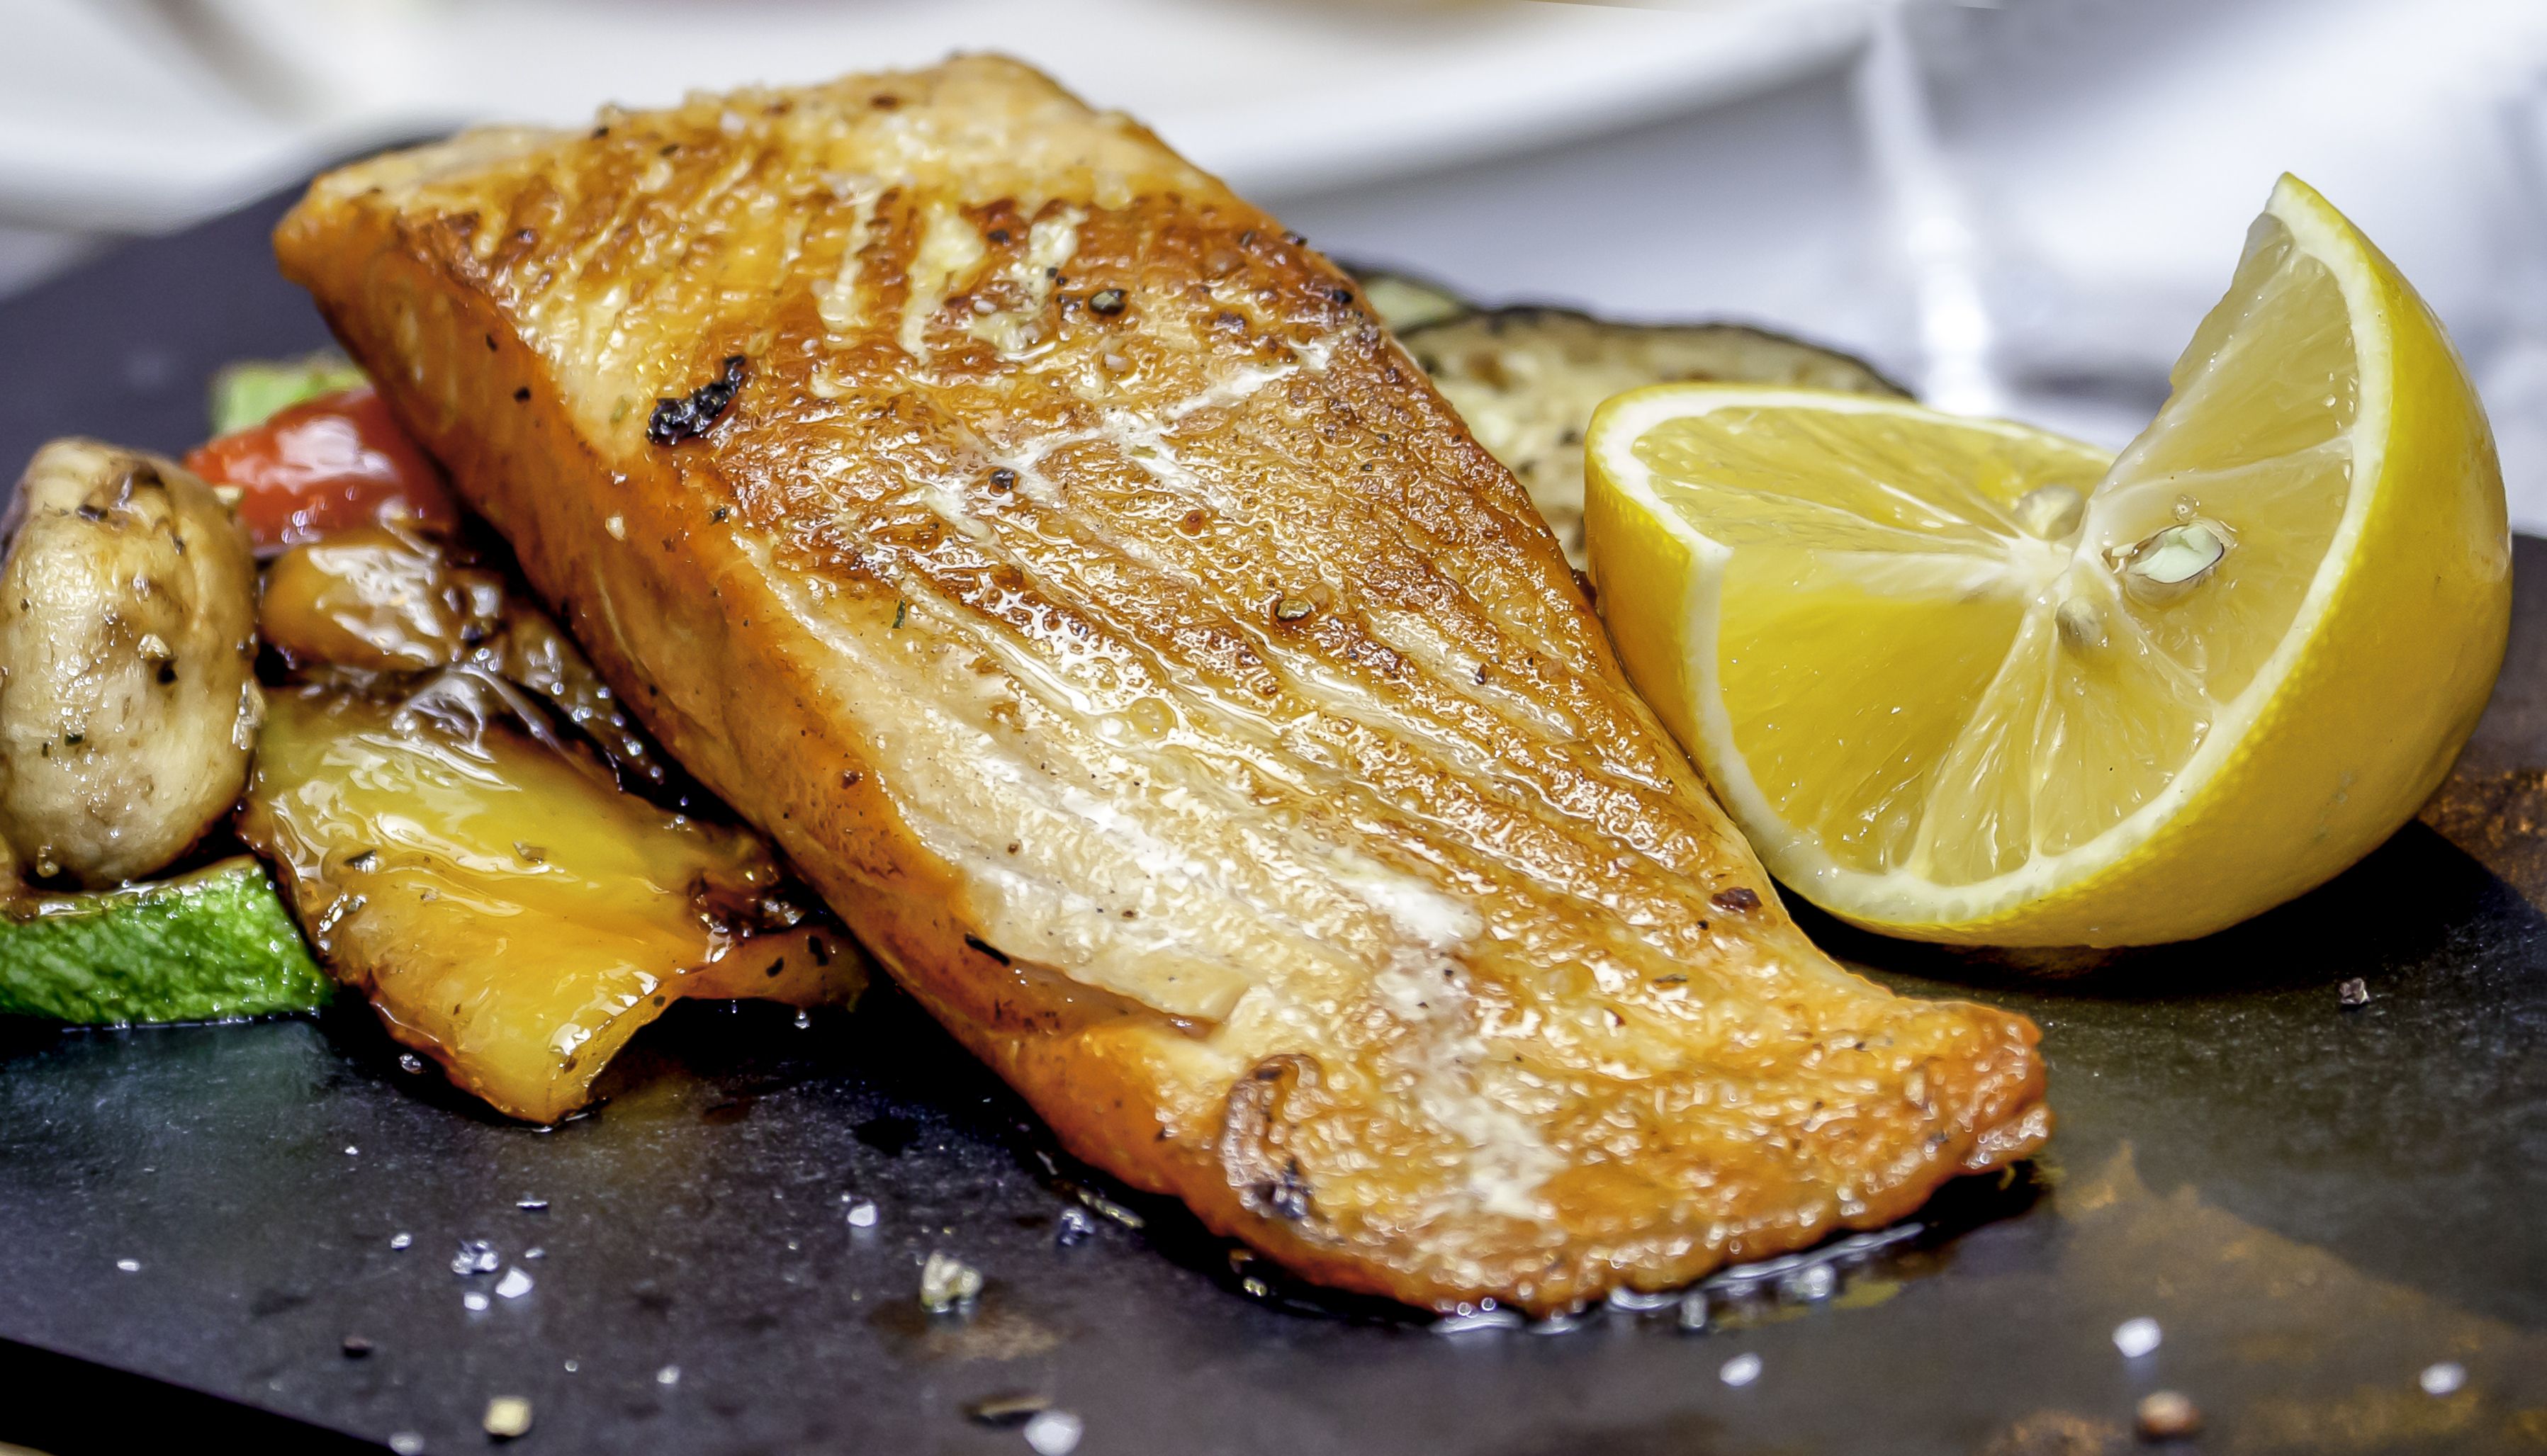 Best Fish to Eat: 12 Healthiest Options